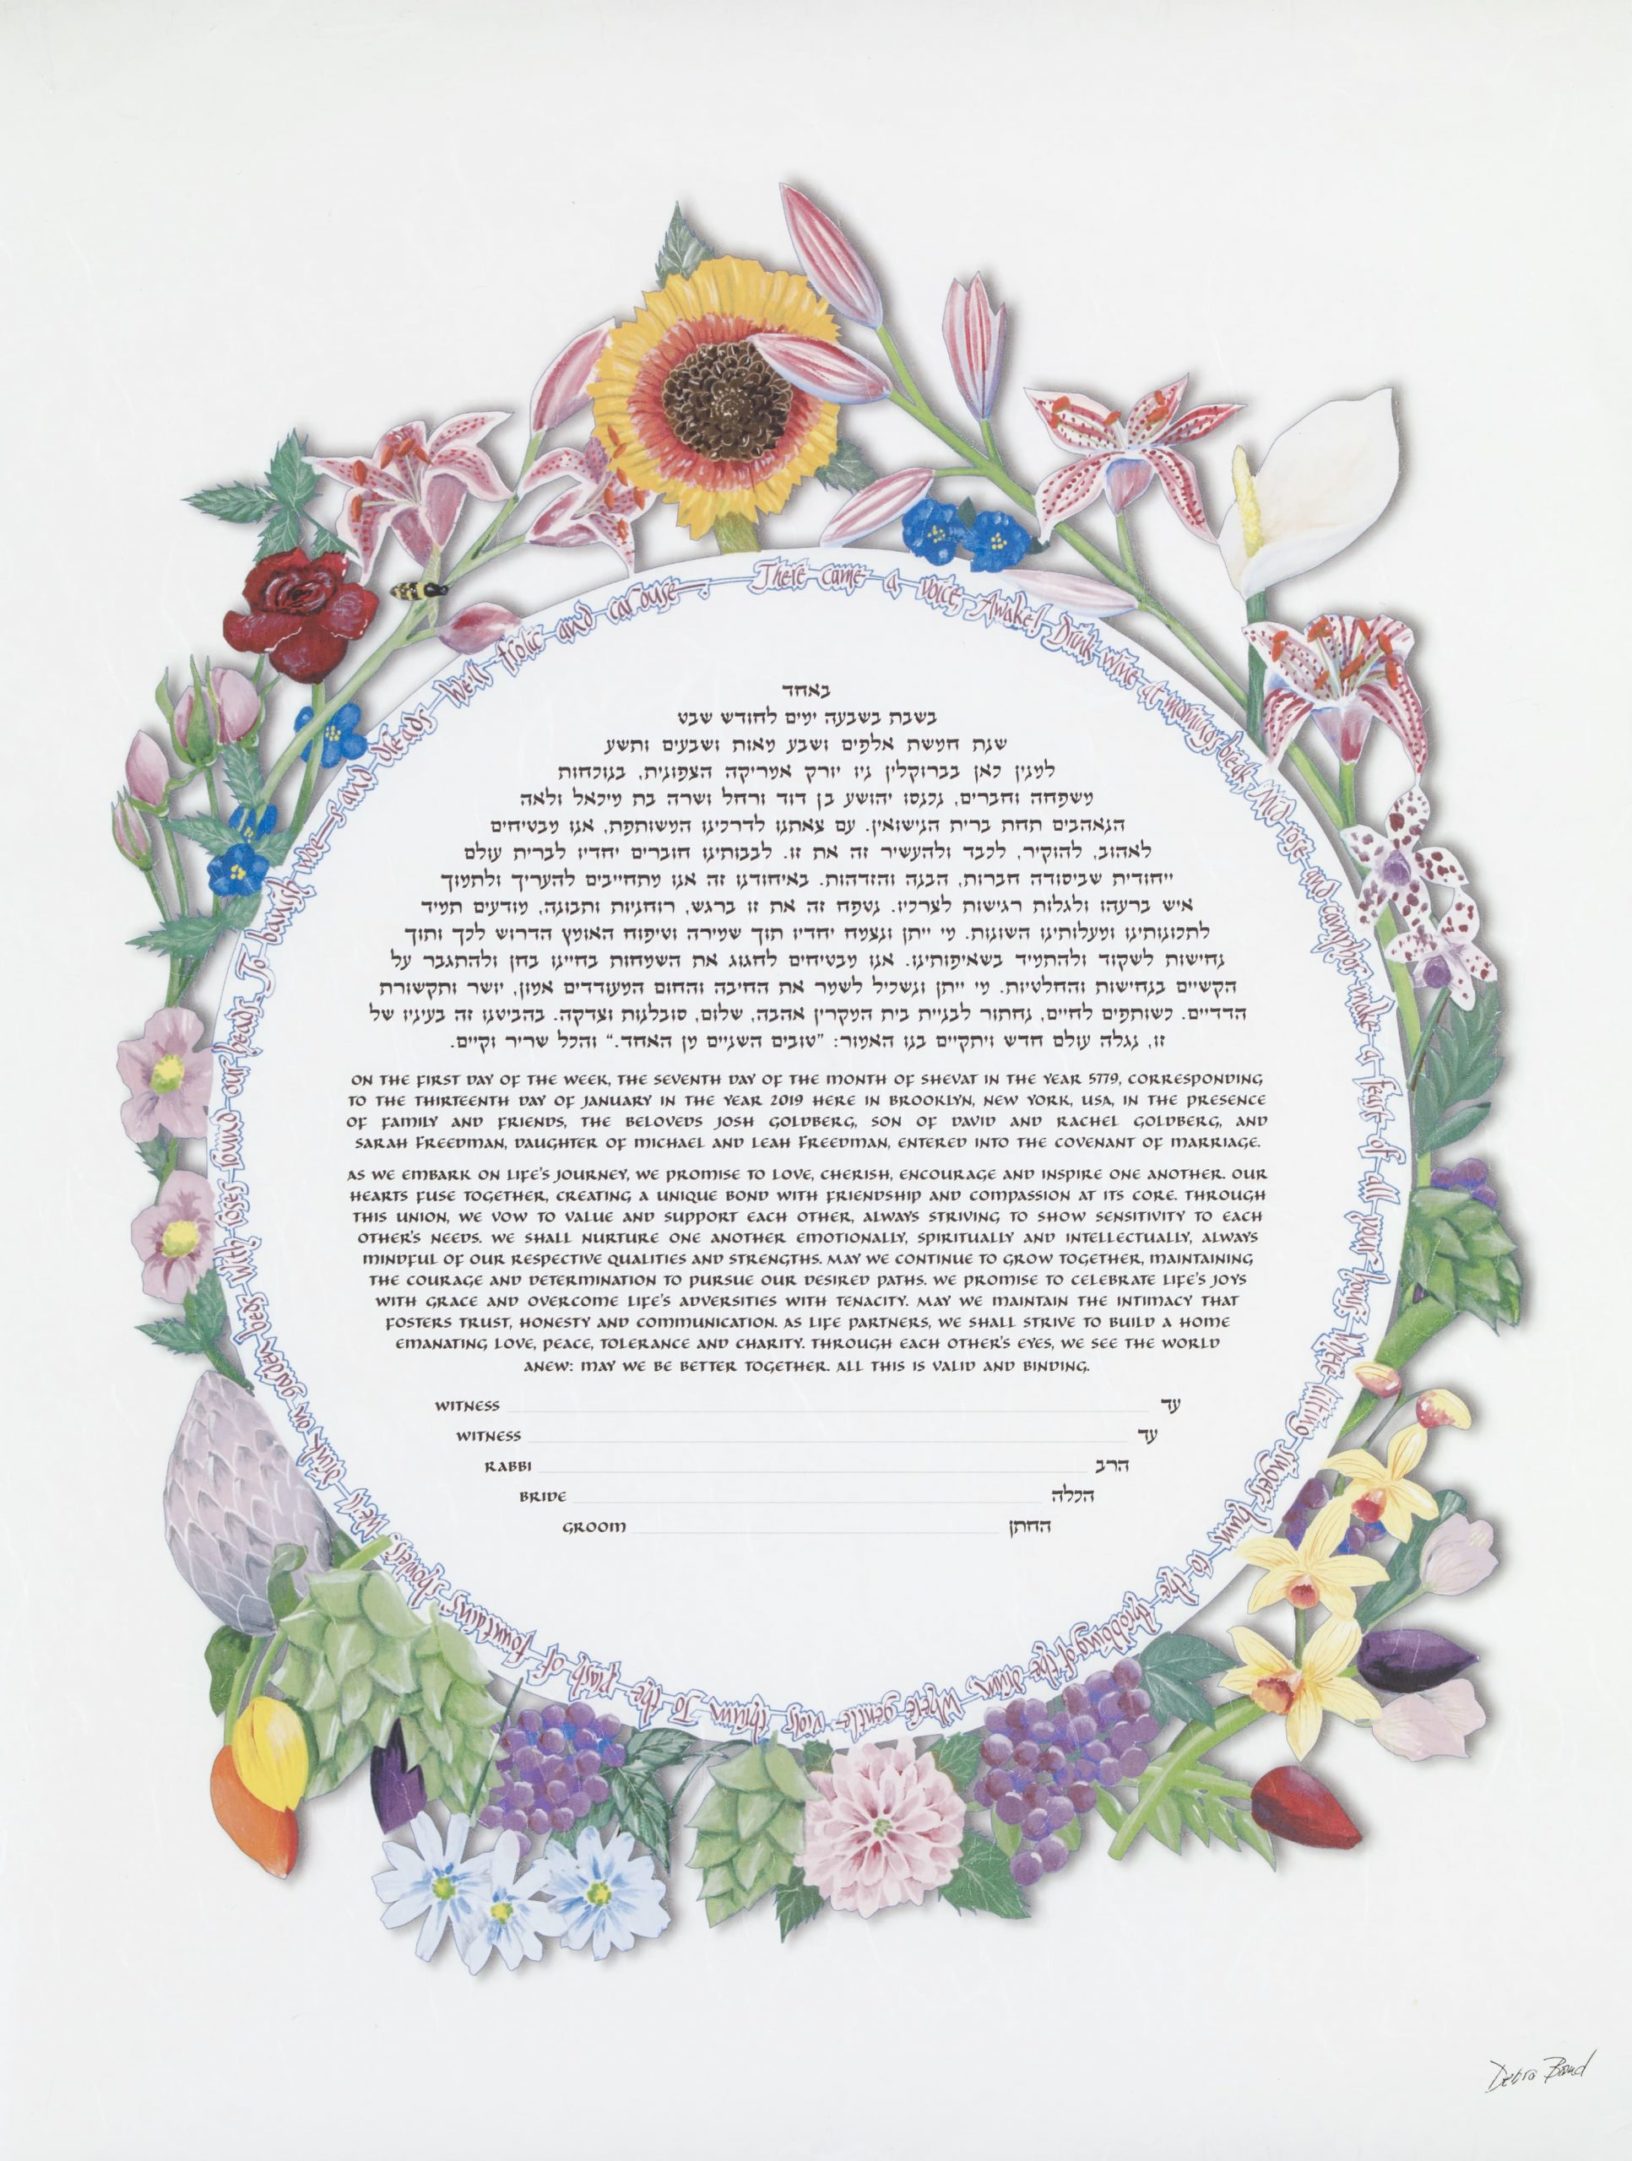 A Feast Of All Your Hours Ketubah Jewish Marriage Contracts by Debra Band